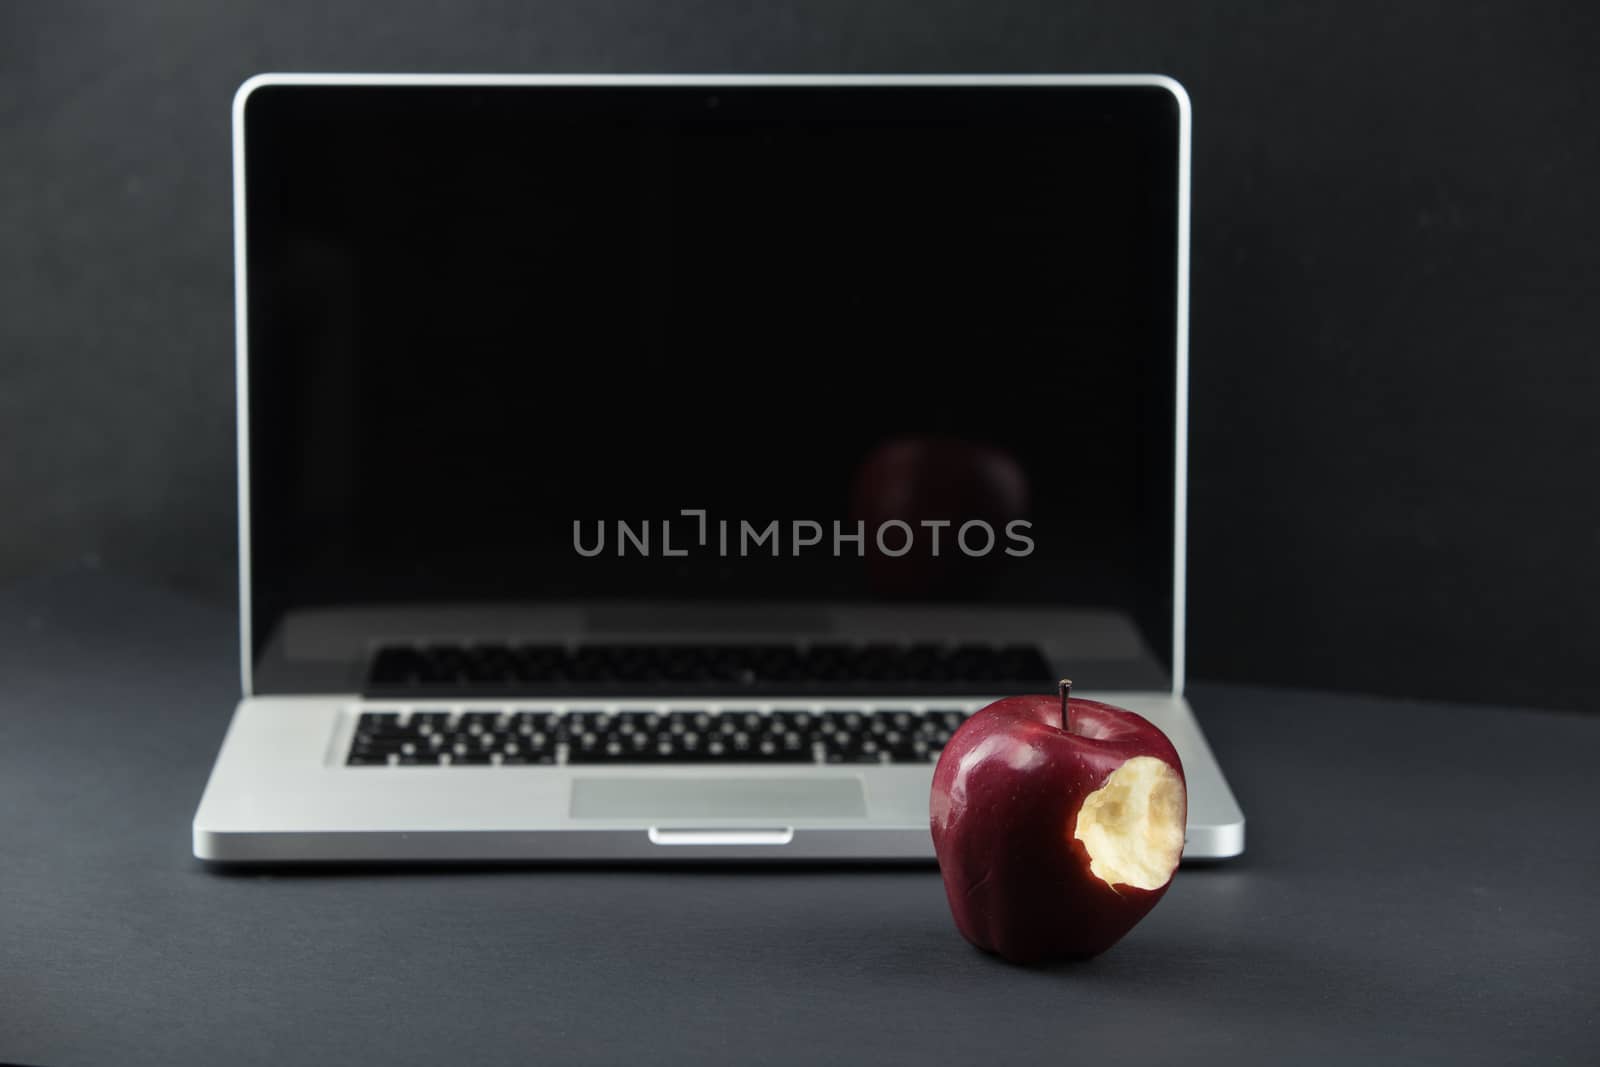 Shiny red apple resting on an open aluminum laptop in selective focus on a black background